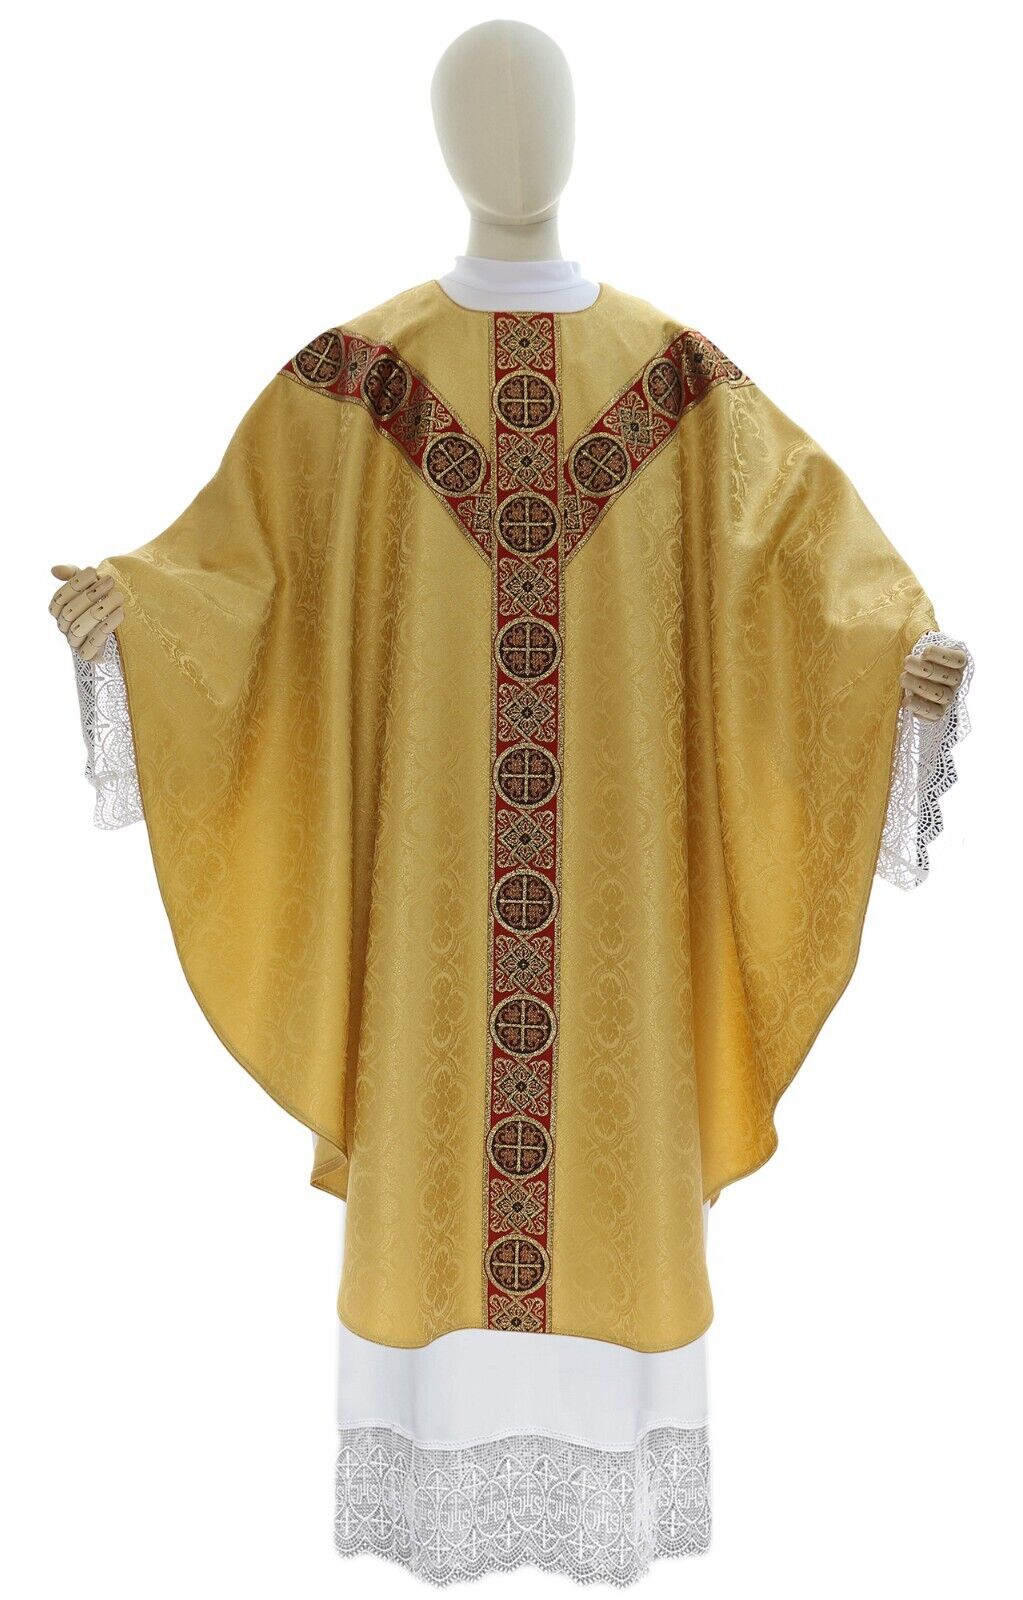 Gold/red Semi Gothic Chasuble with stole Vestment Casulla Dorada GY202GC25